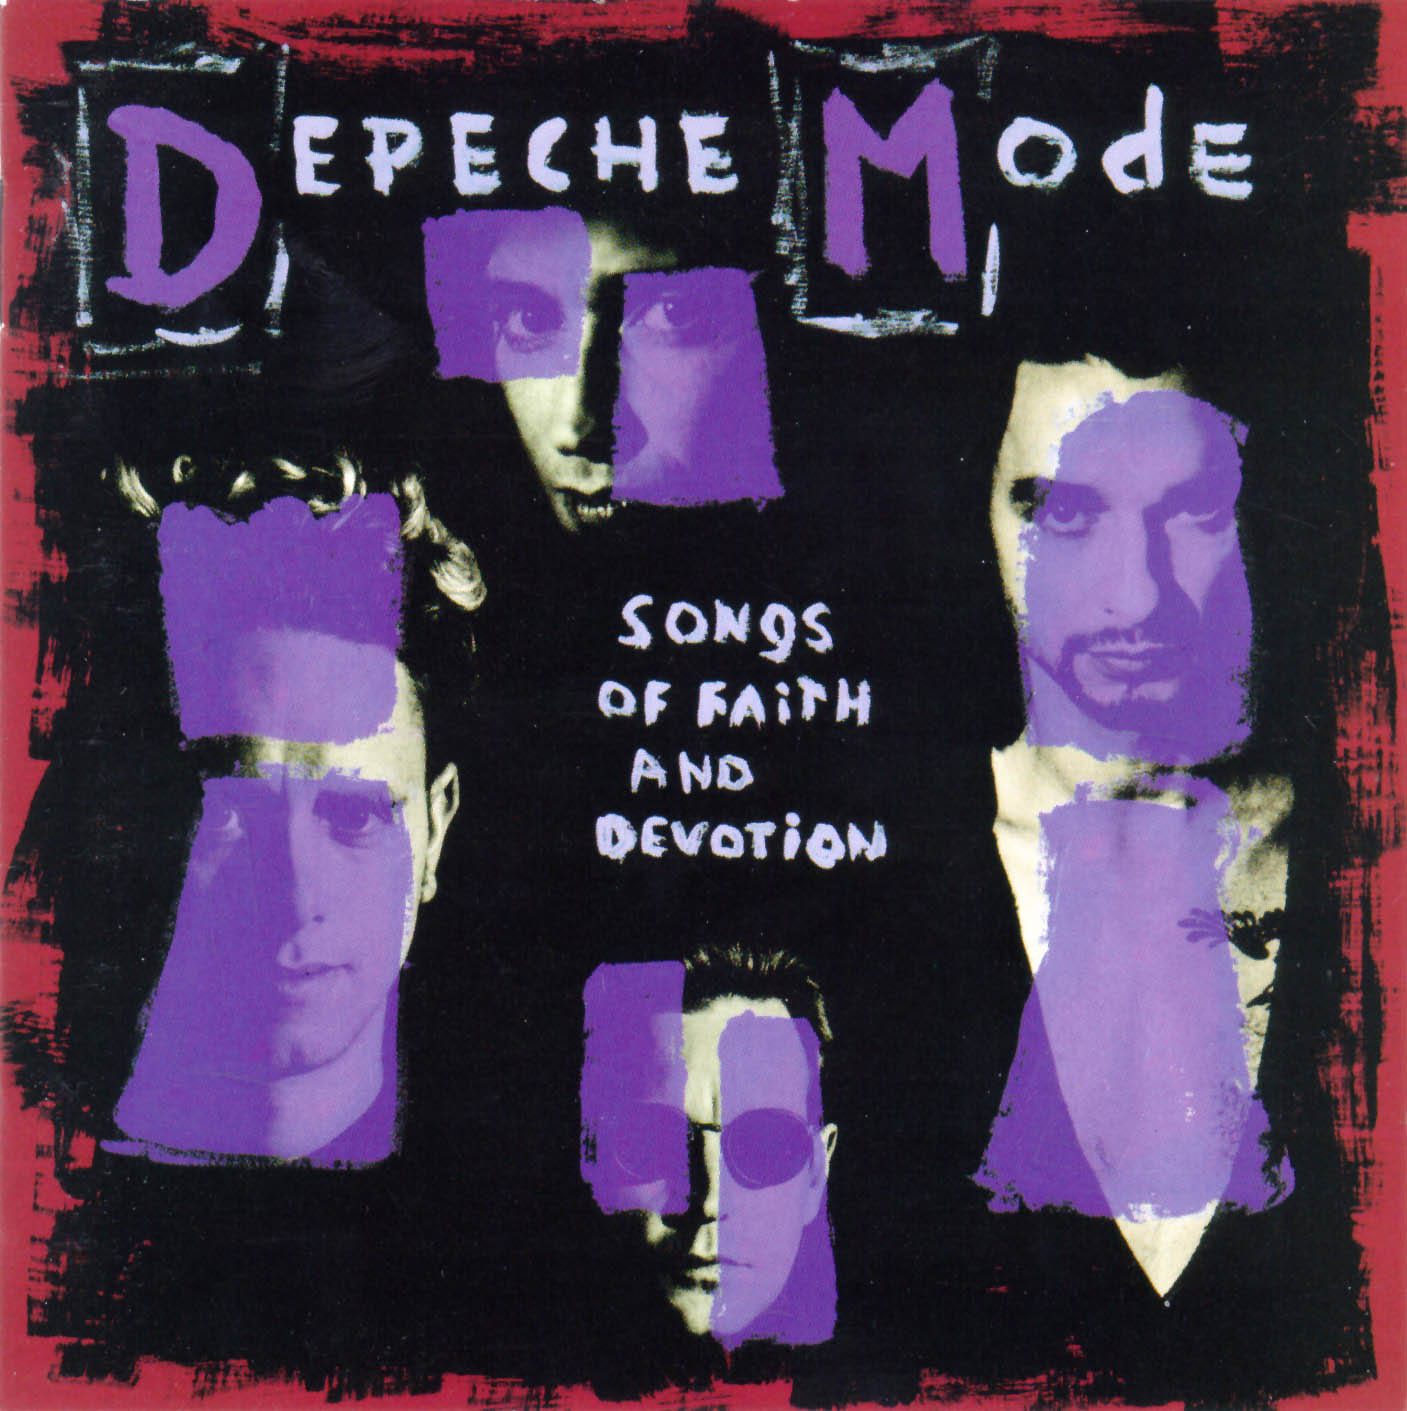 DEPECHE MODE – Songs of faith and devotion